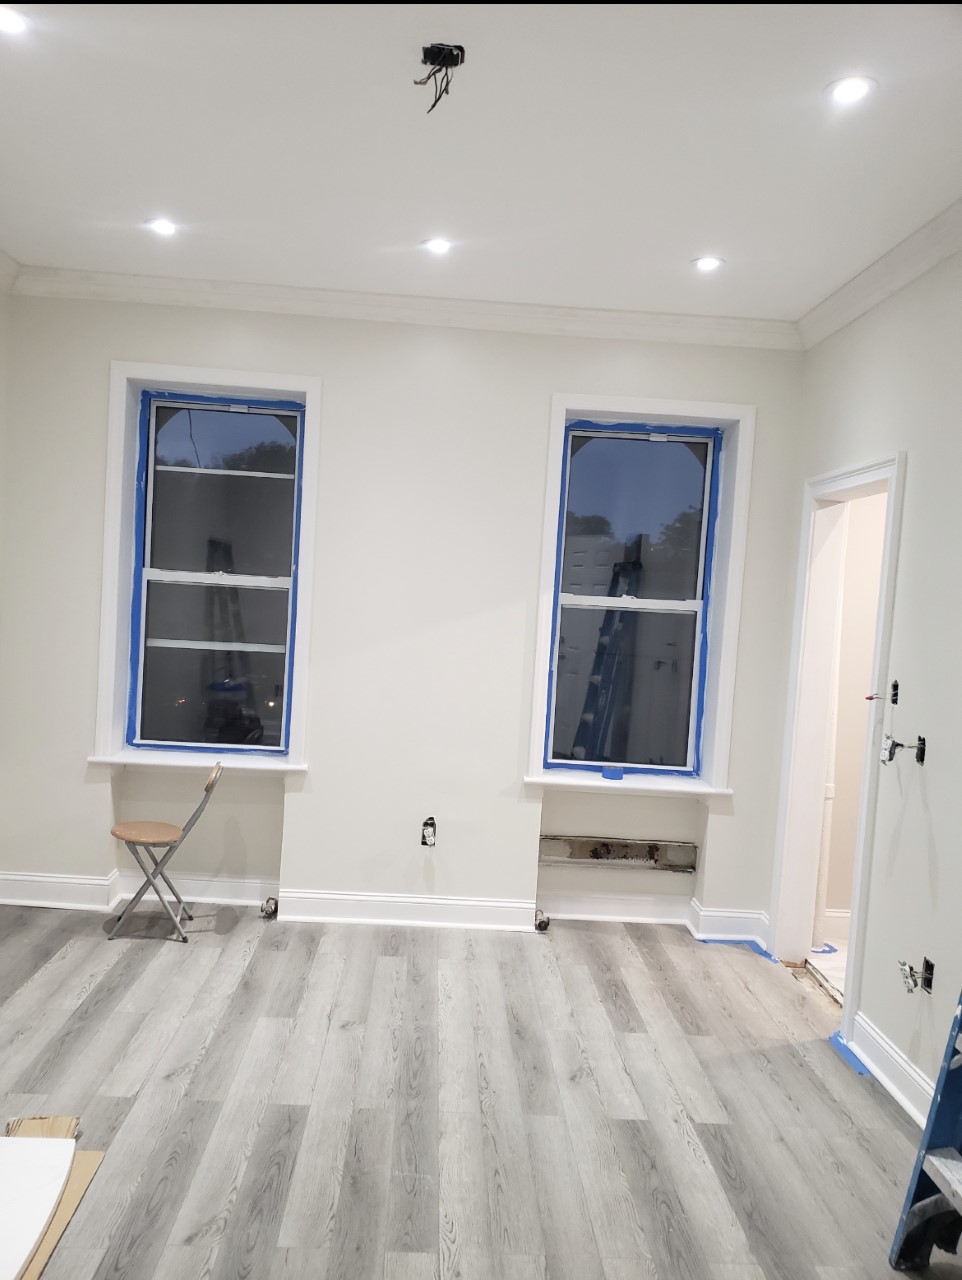 Beautifully Renovated 1 Bedroom Apartment for Rent. Features Living Room/Dining Room, Kitchen w/Stainless Steel Appliances, Renovated Bathroom w/Skylight and Wood Floors Throughout. Convenient to Transportation & Shopping.